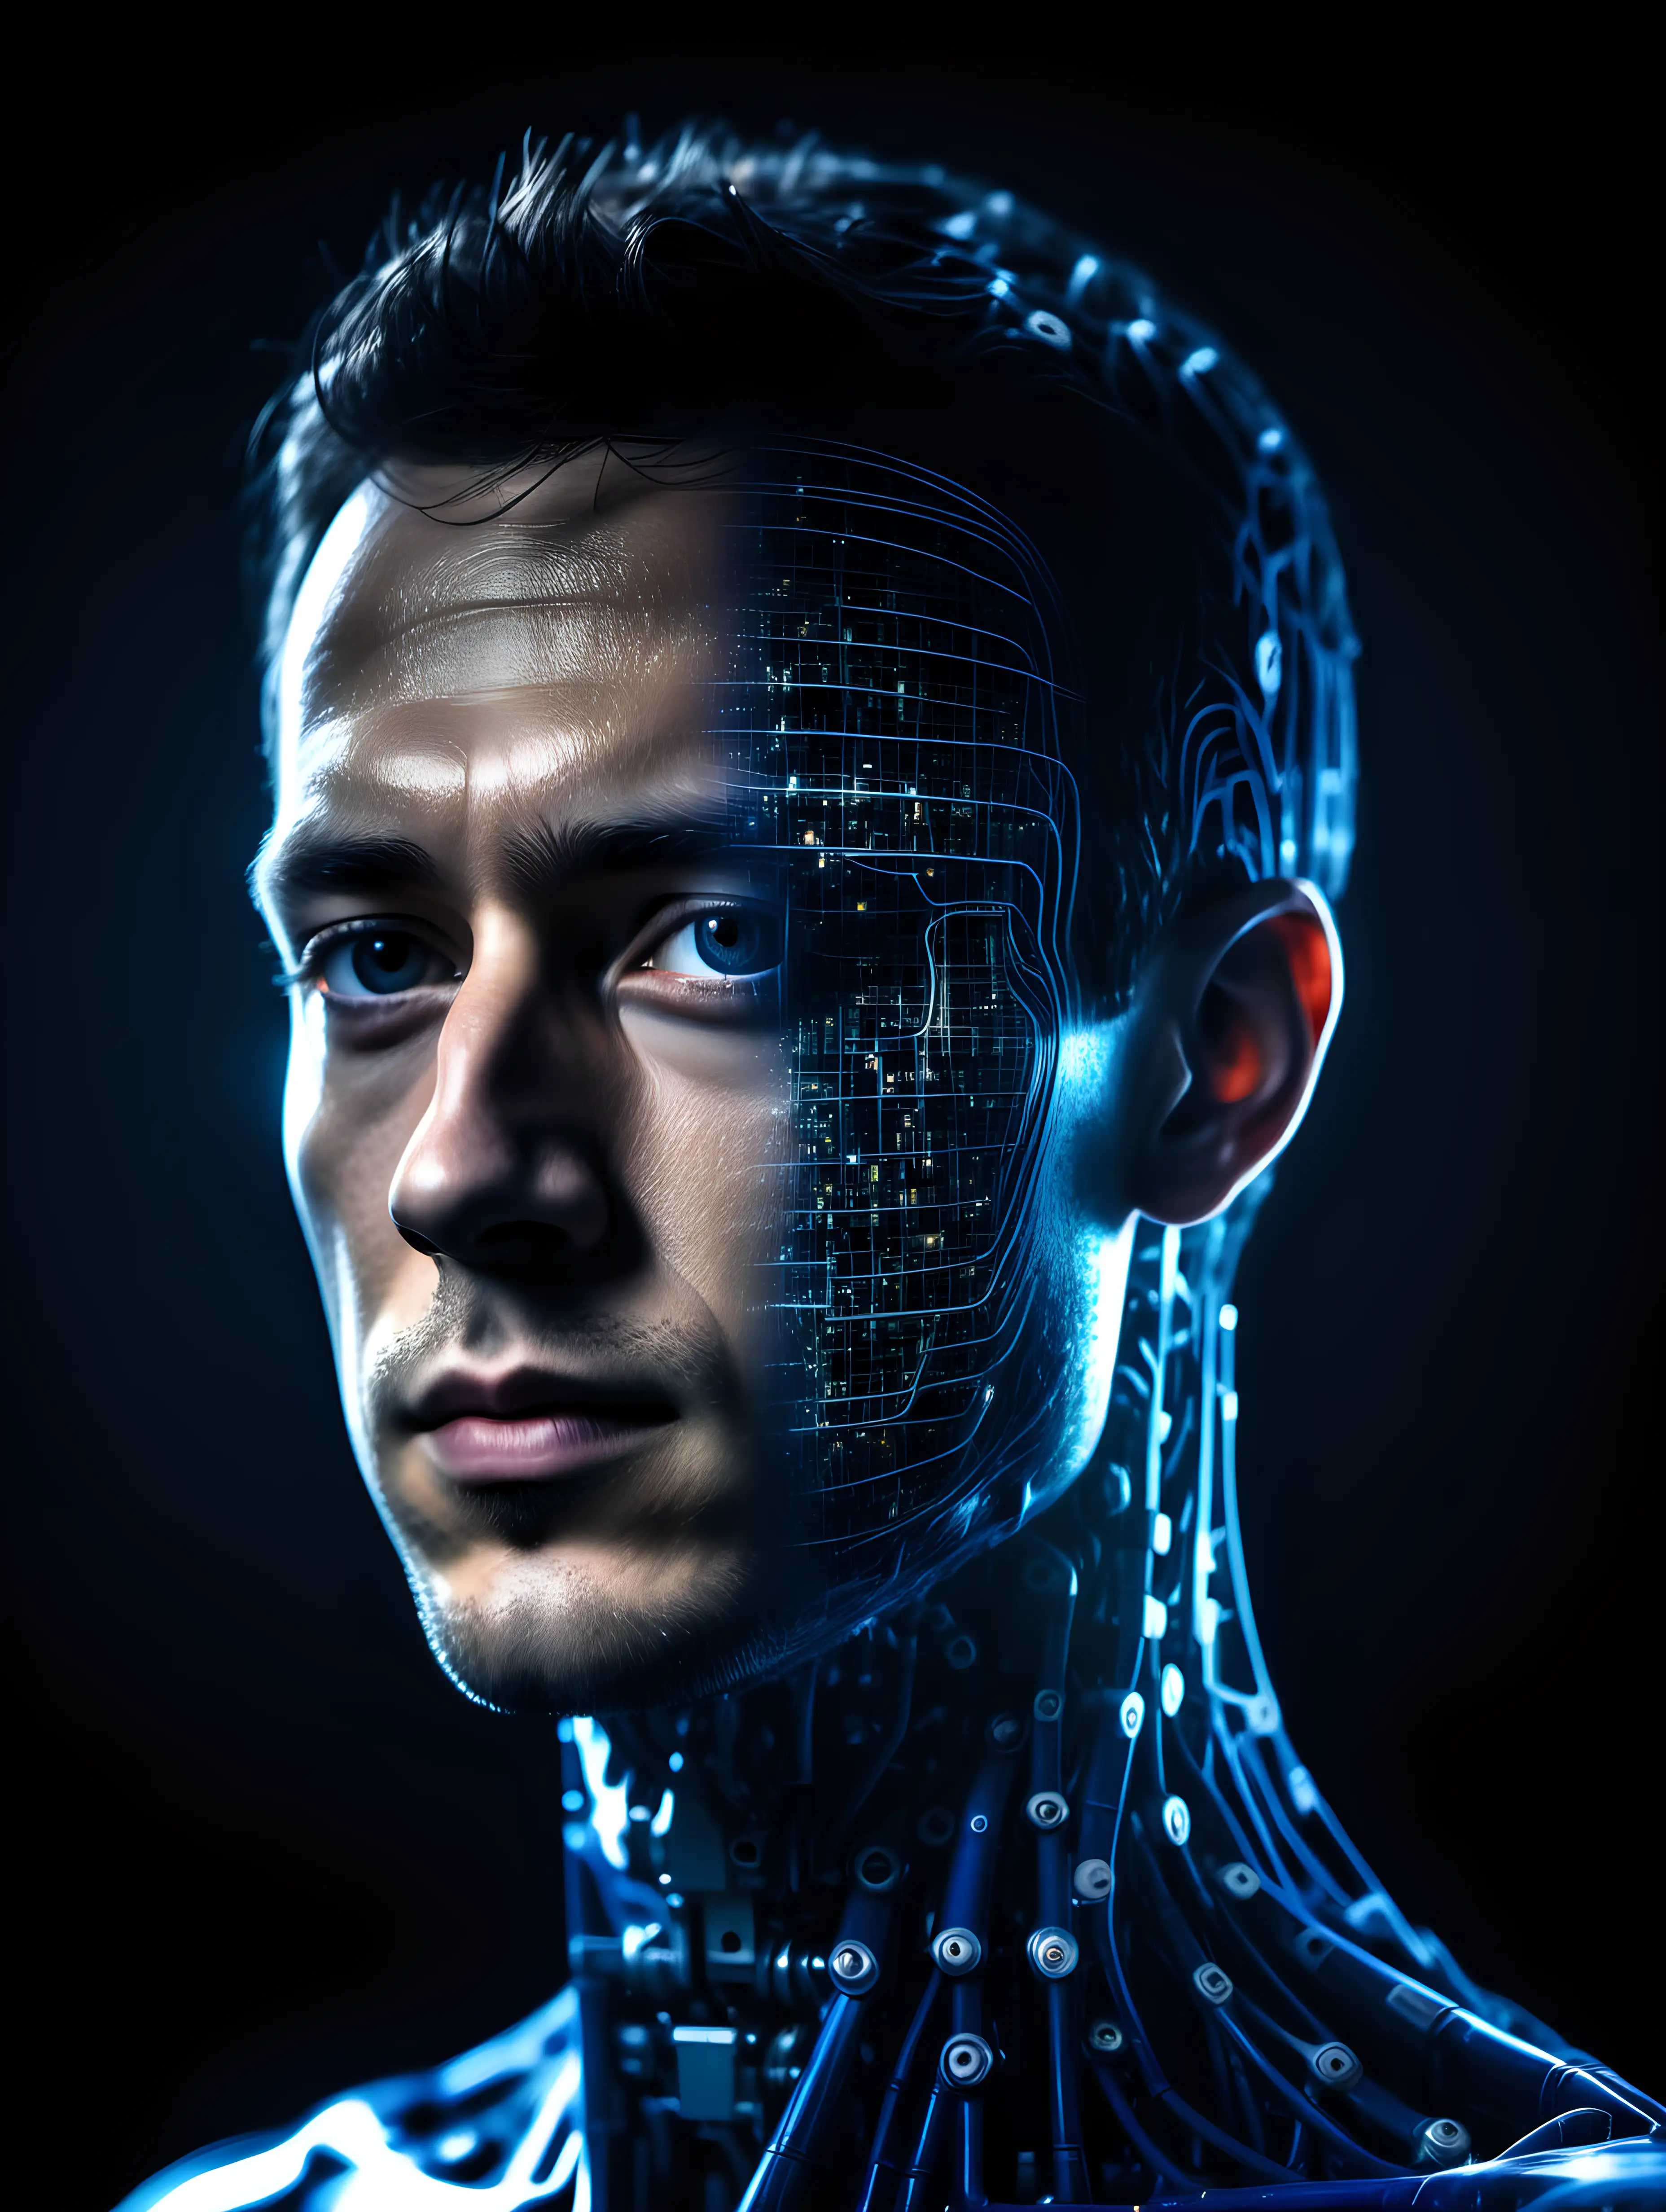 Futuristic Portrait Young Man with Cybernetic Implants in MatrixInspired Setting